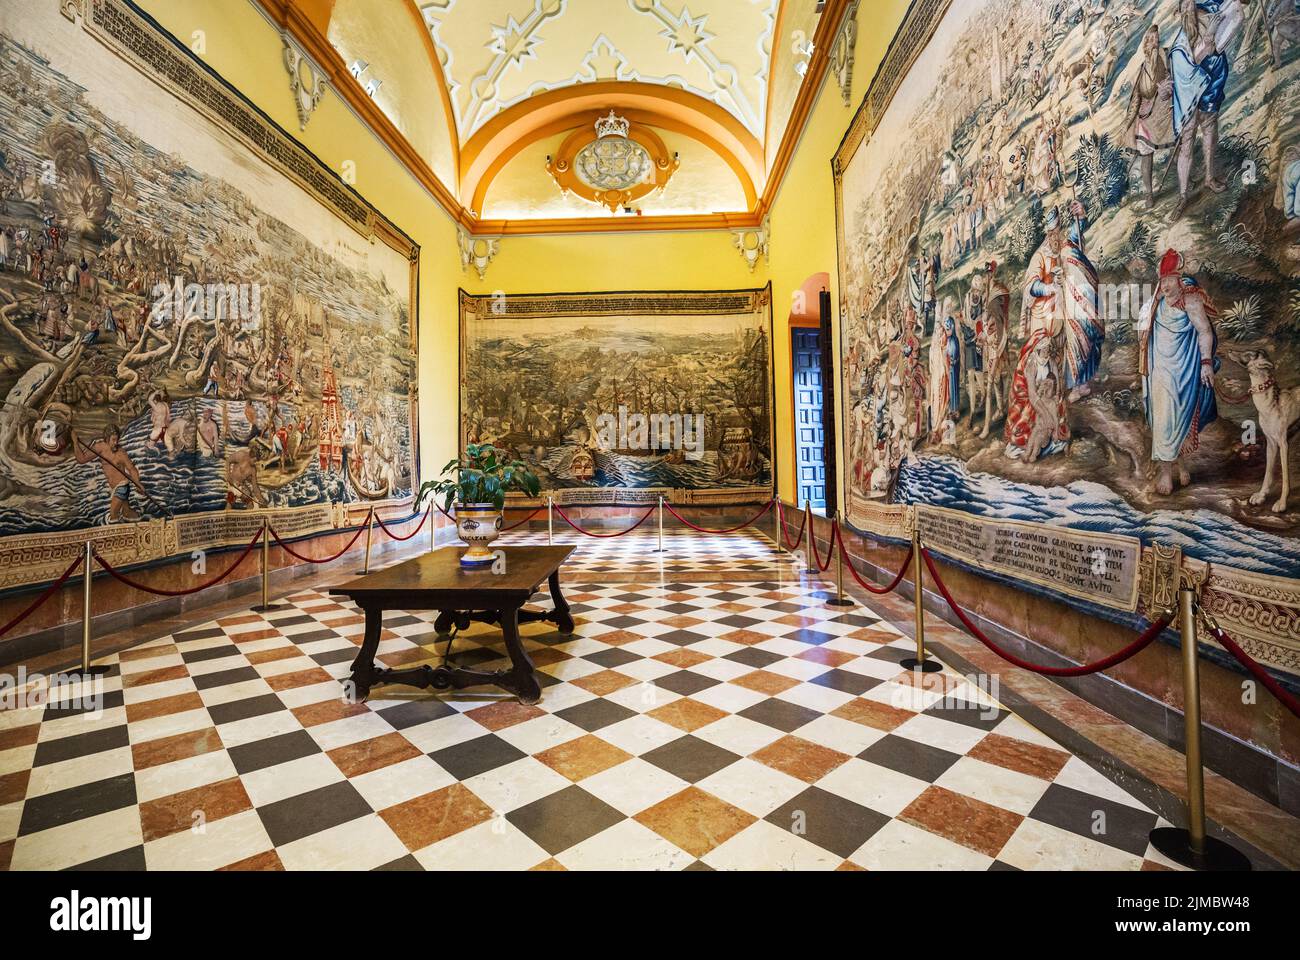 Tapestry room in the Palace of Alcazar, Seville Stock Photo